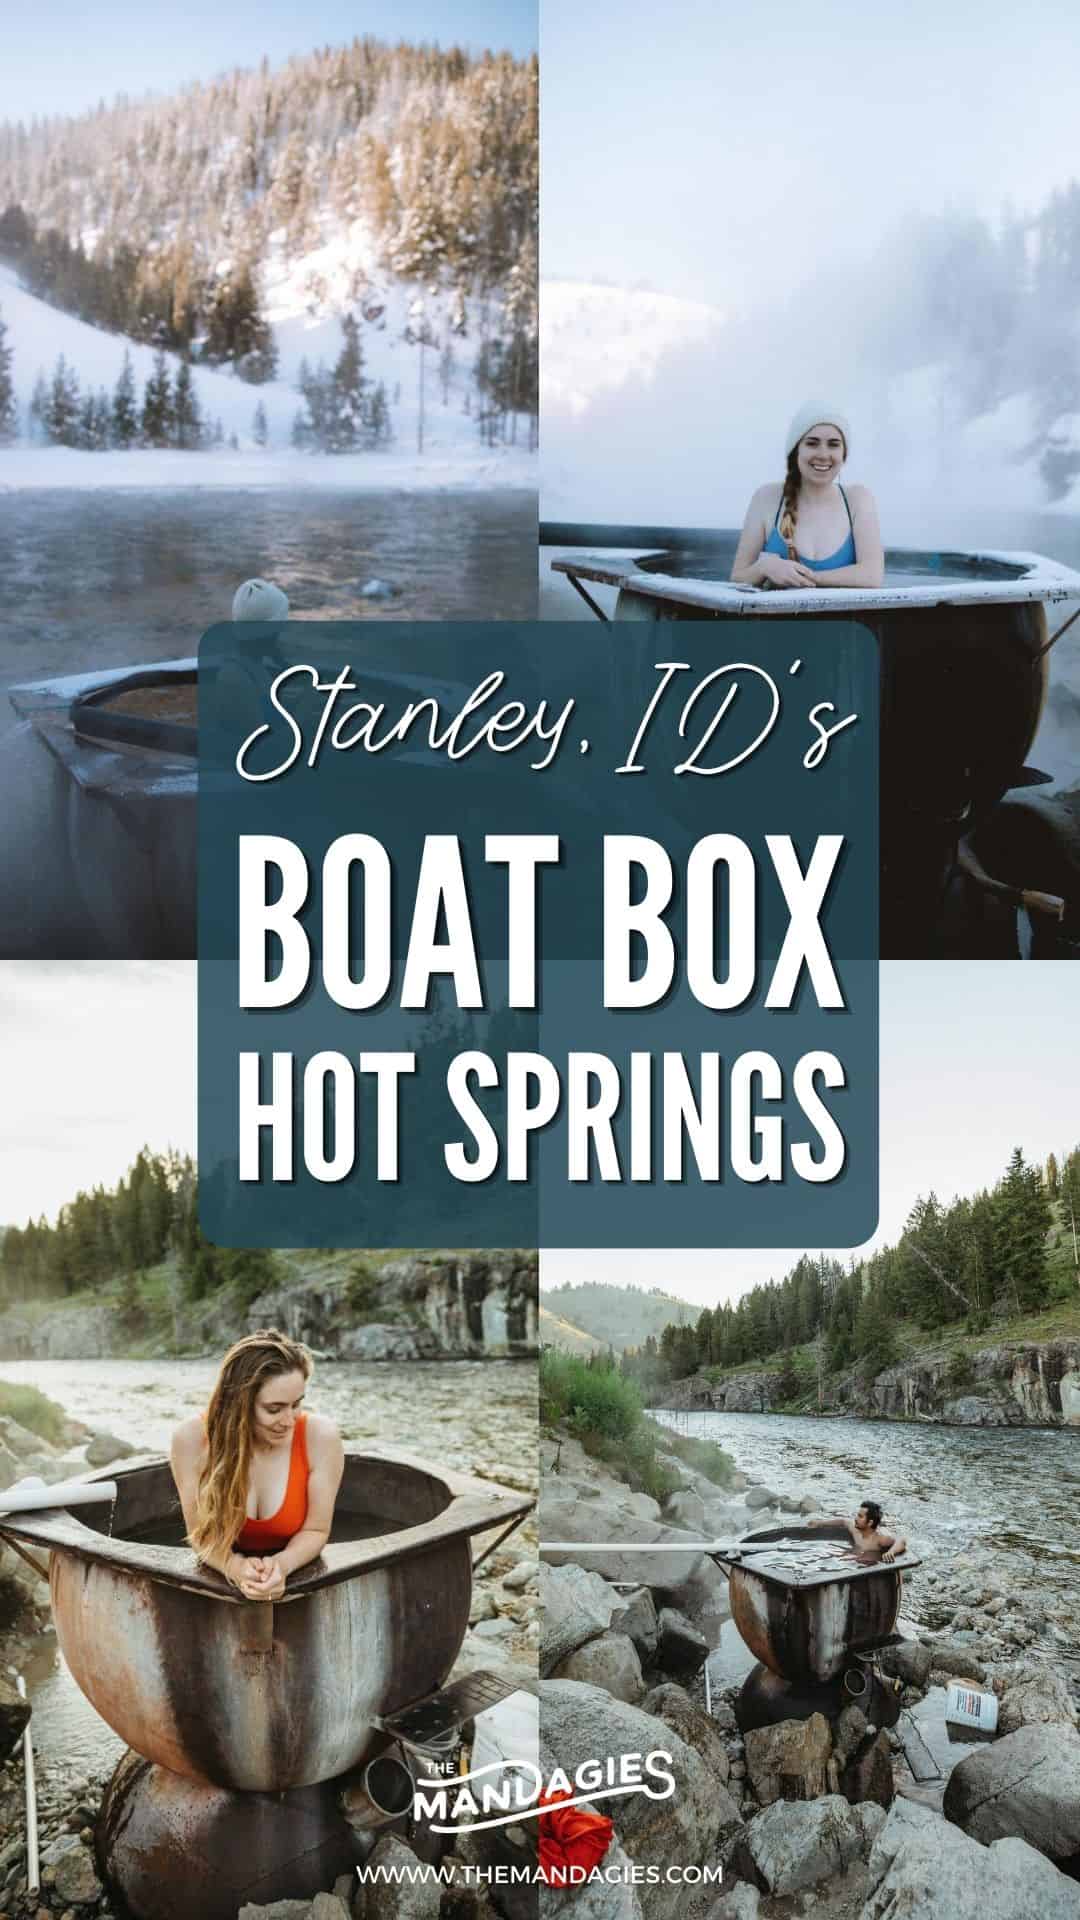 Situated on the Salmon River, Boat Box Hot Springs is a single-tub hot springs near Stanley, Idaho just waiting to be visited! We're giving you all the details and more here, including the best times to visit, what to pack, and sharing what it's like to come in different seasons! #idaho #hotsprings #stanleyidaho #Roadtrip #summer #hiking #camping #salmonriver #boatbox #mountains #travel #USAtravel #usa #photography #sunset #stanley